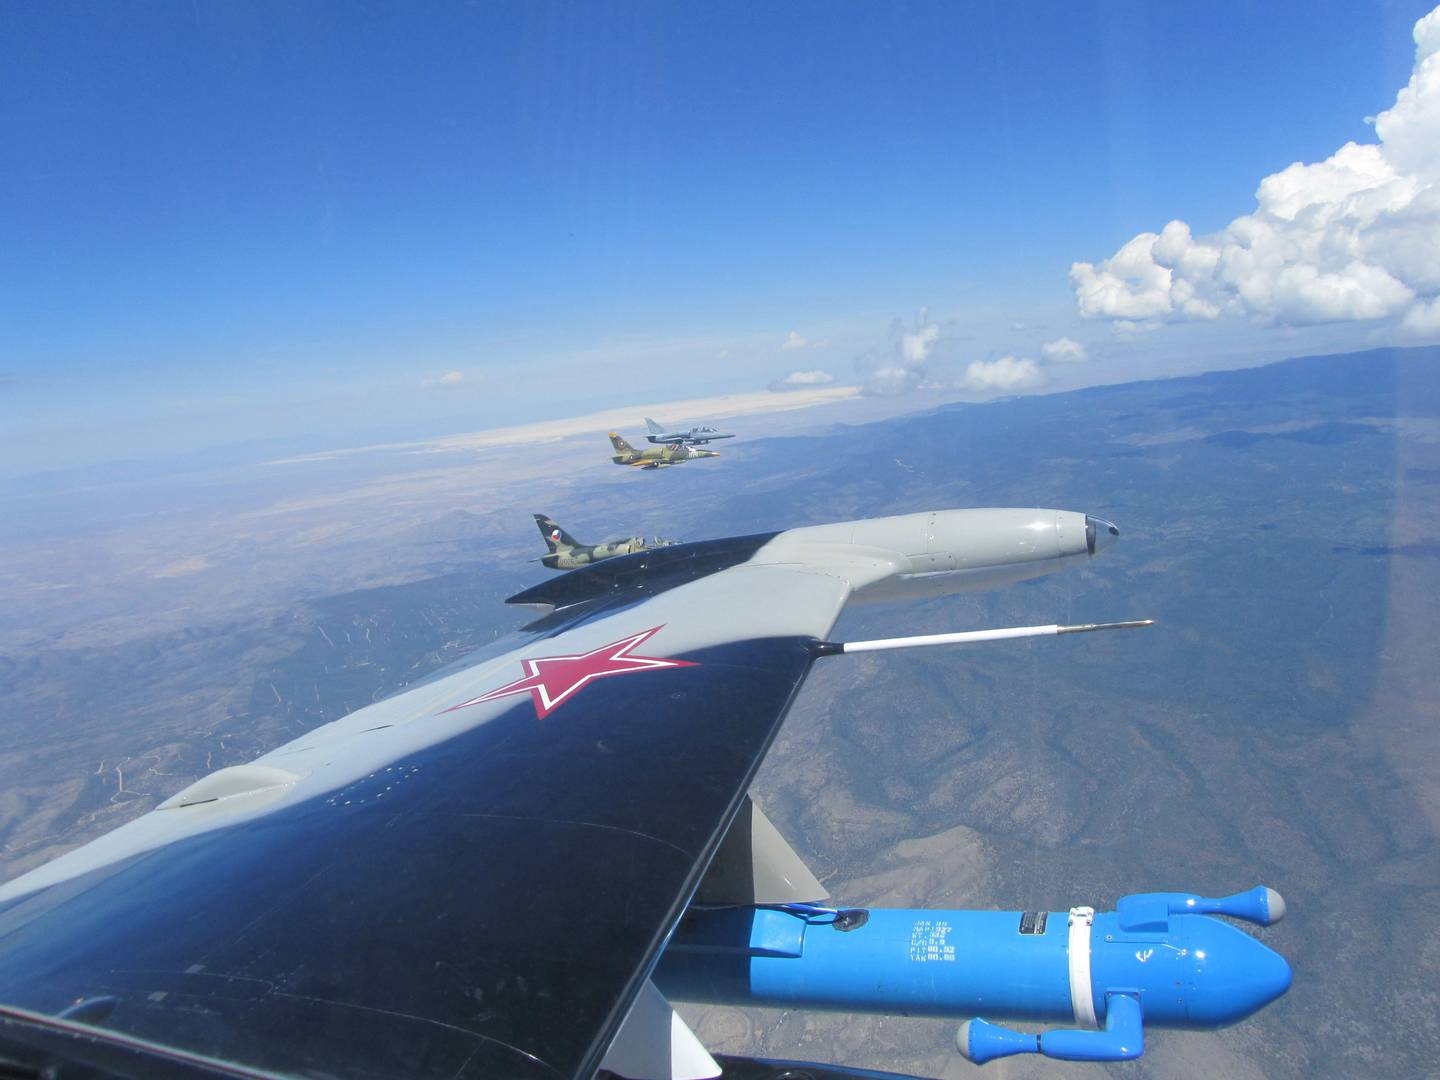 Georgia Tech Research Institute next-generation electronic warfare equipment — carried in a bright blue pod at the bottom of the photo — being flight-tested aboard an L-39 Albatros jet trainer aircraft.